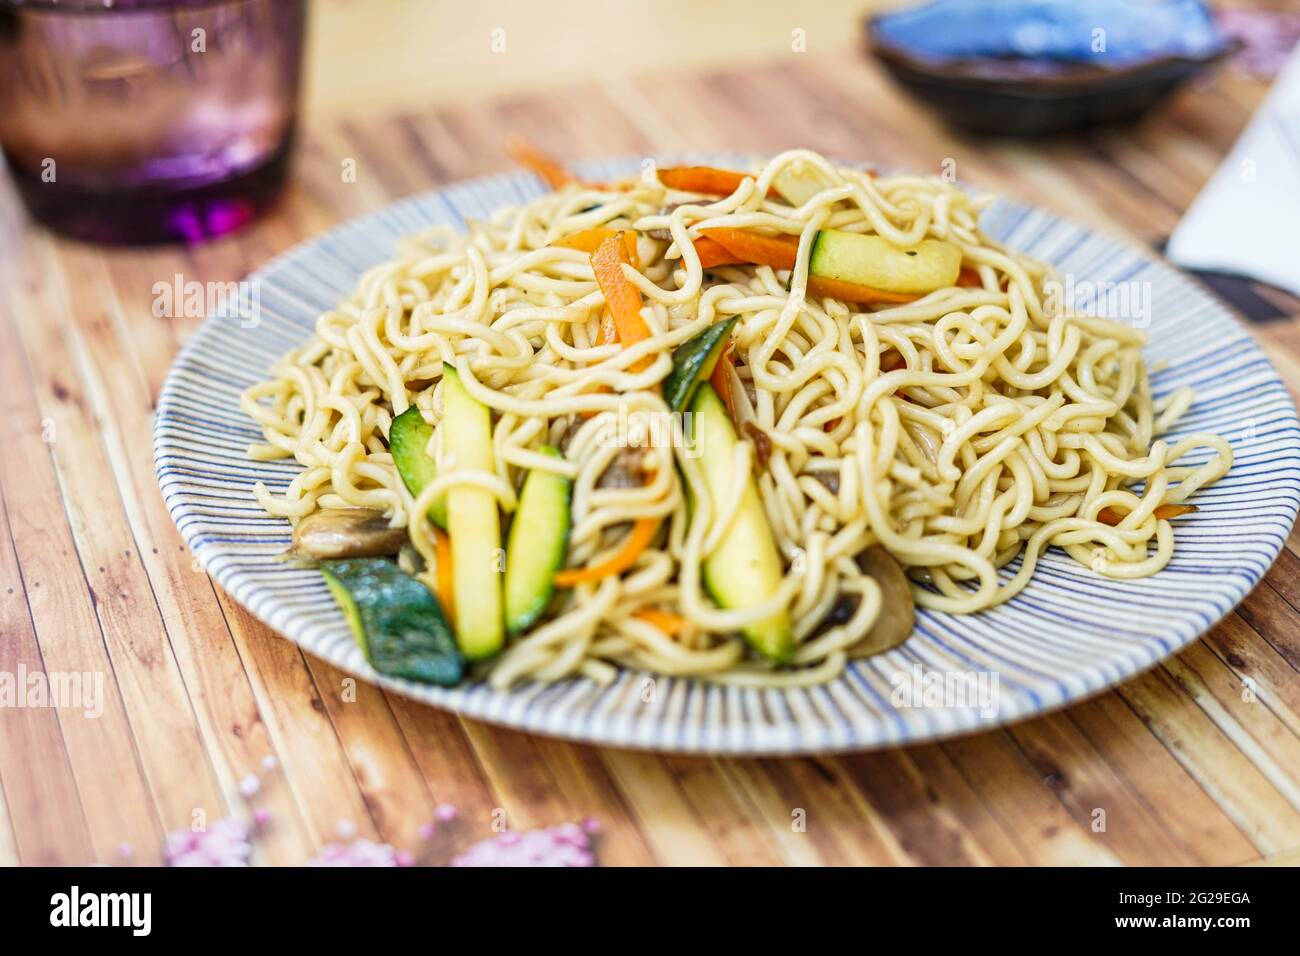 A restaurant plate with Japanese noodles Stock Photo